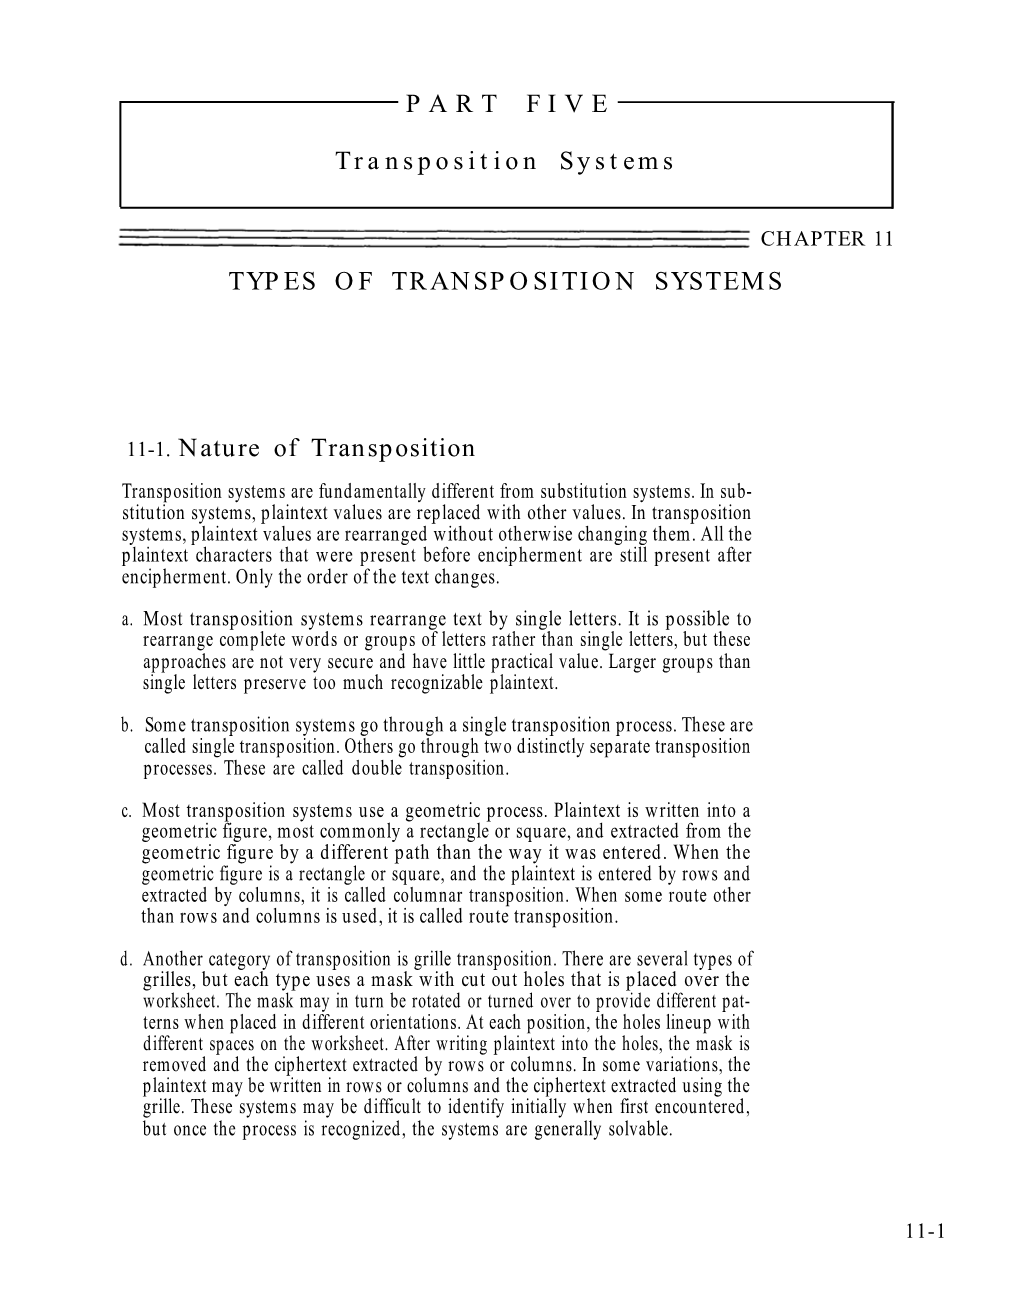 Types of Transposition Systems